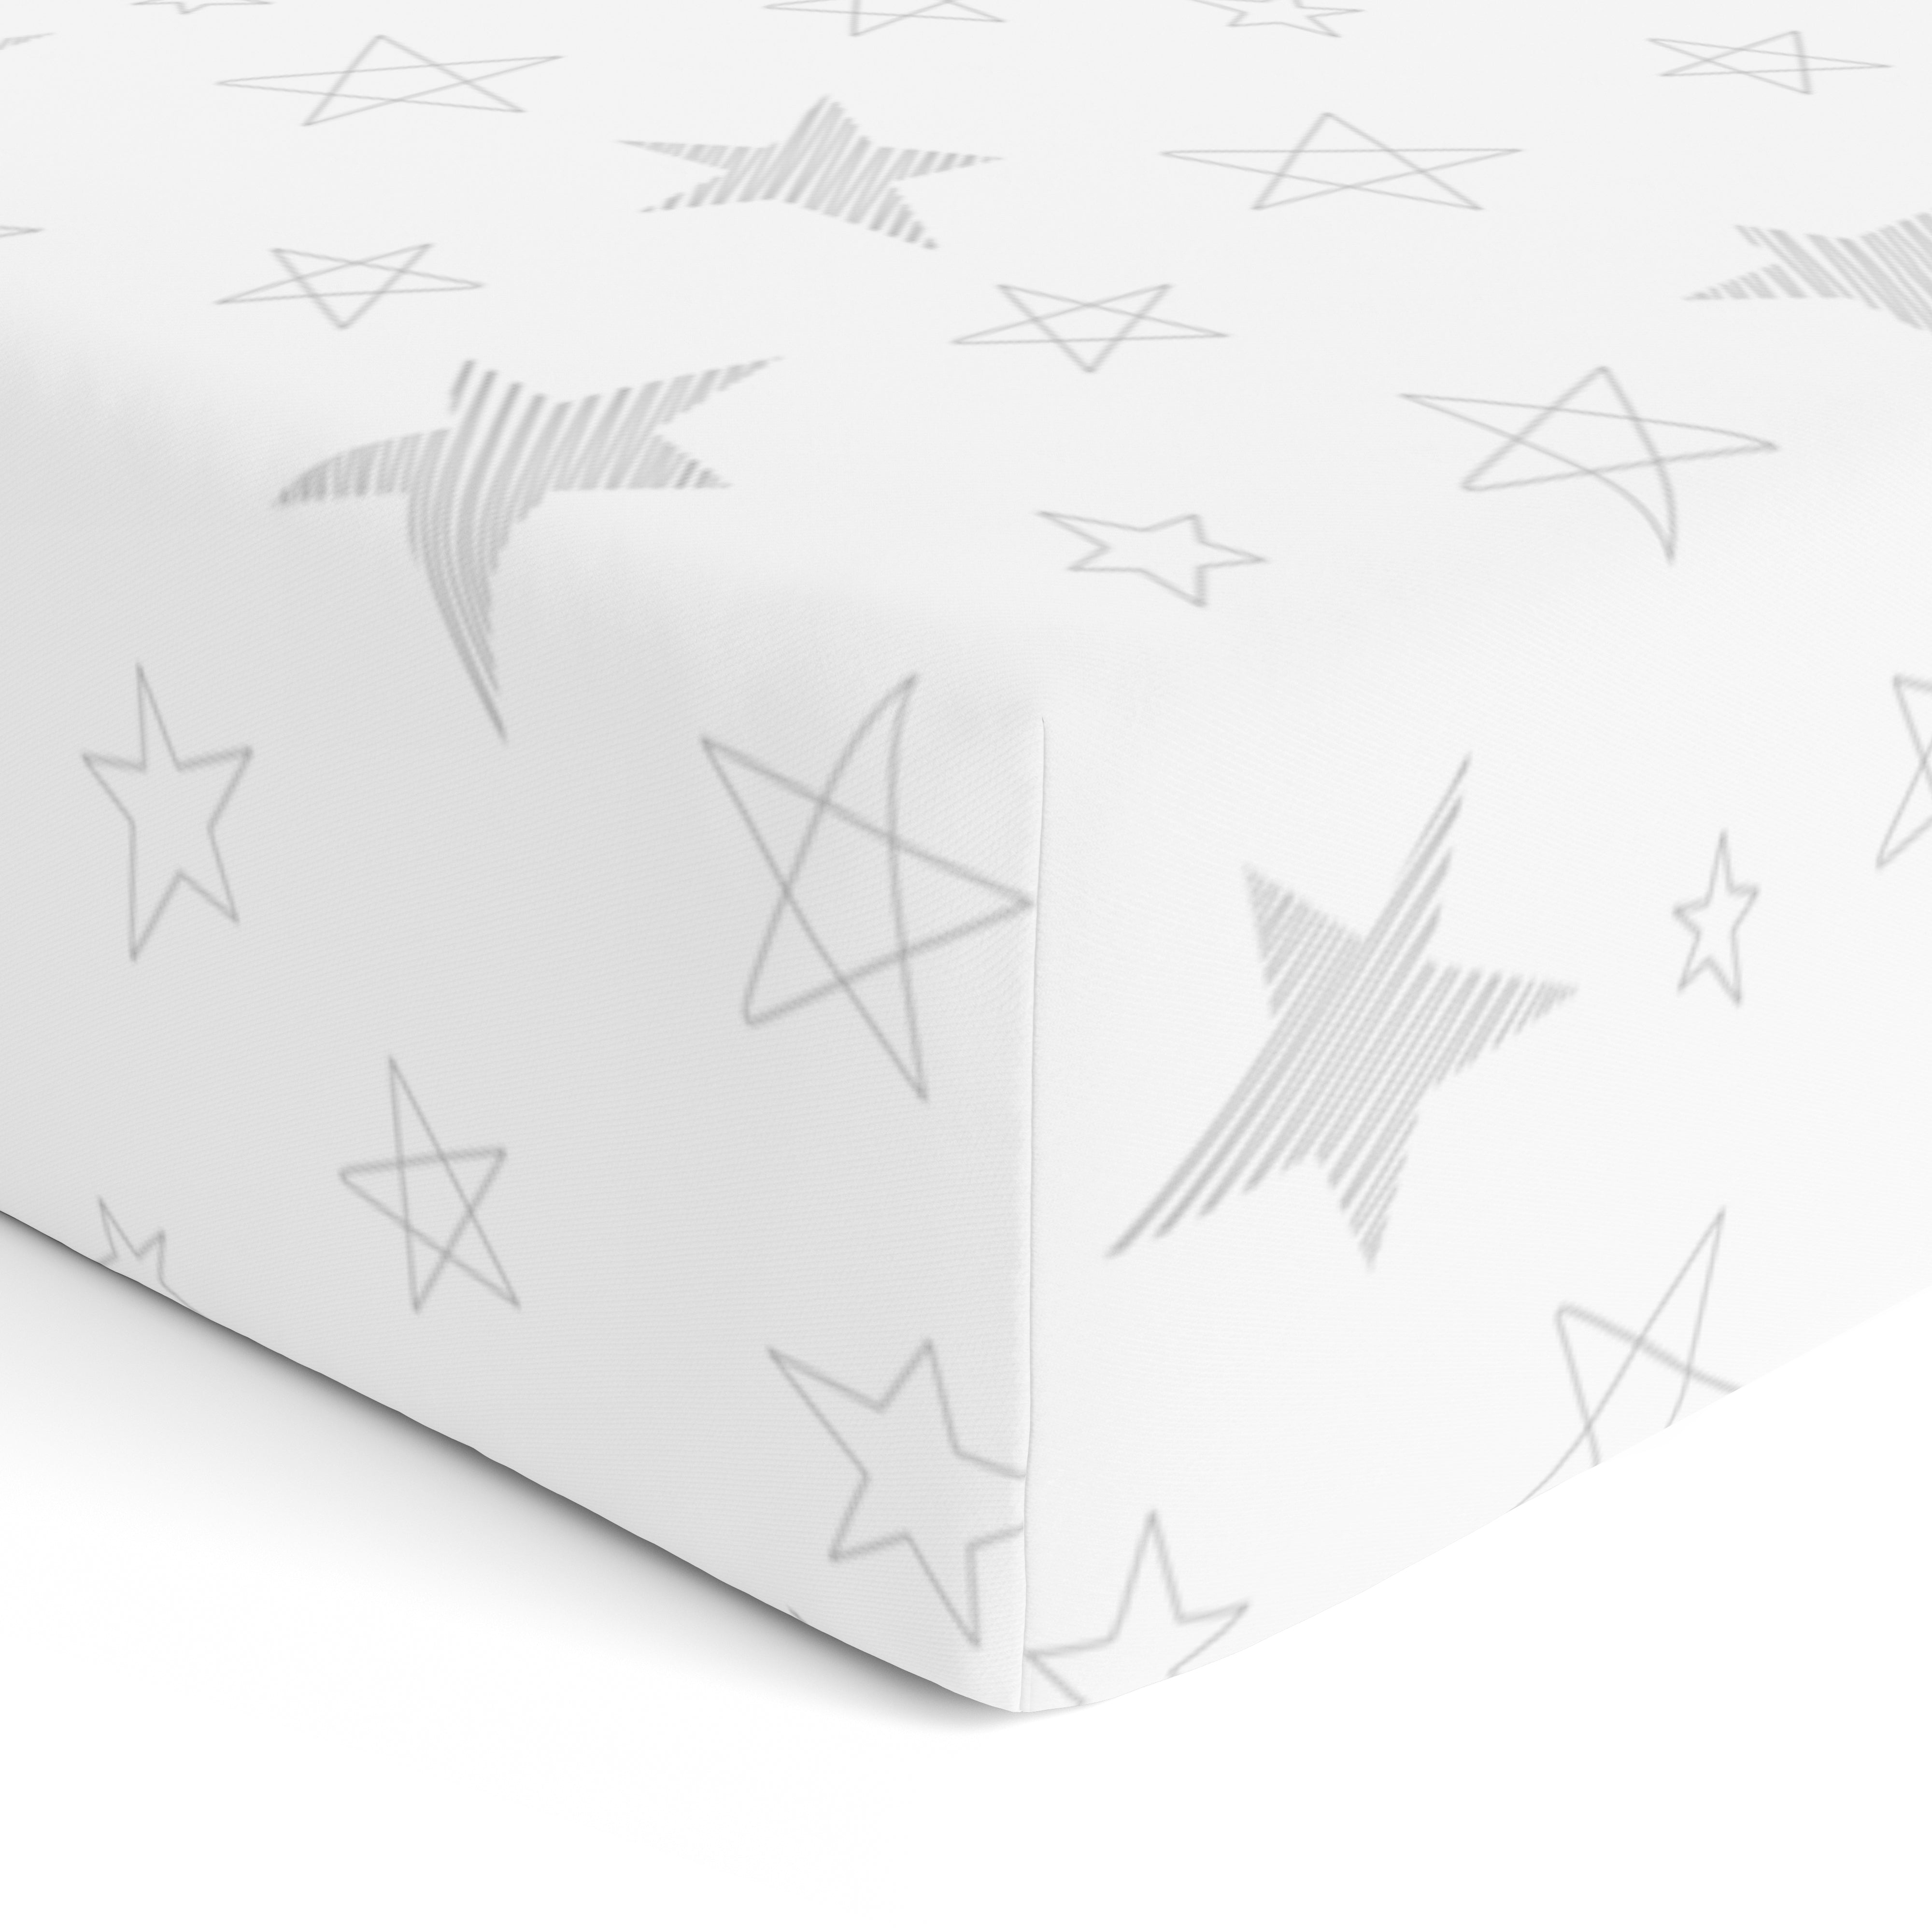 The White Cradle Pure Organic Cotton Fitted Cot Sheet for Baby Crib 24 x 48 inch - Big Stars (Medium)